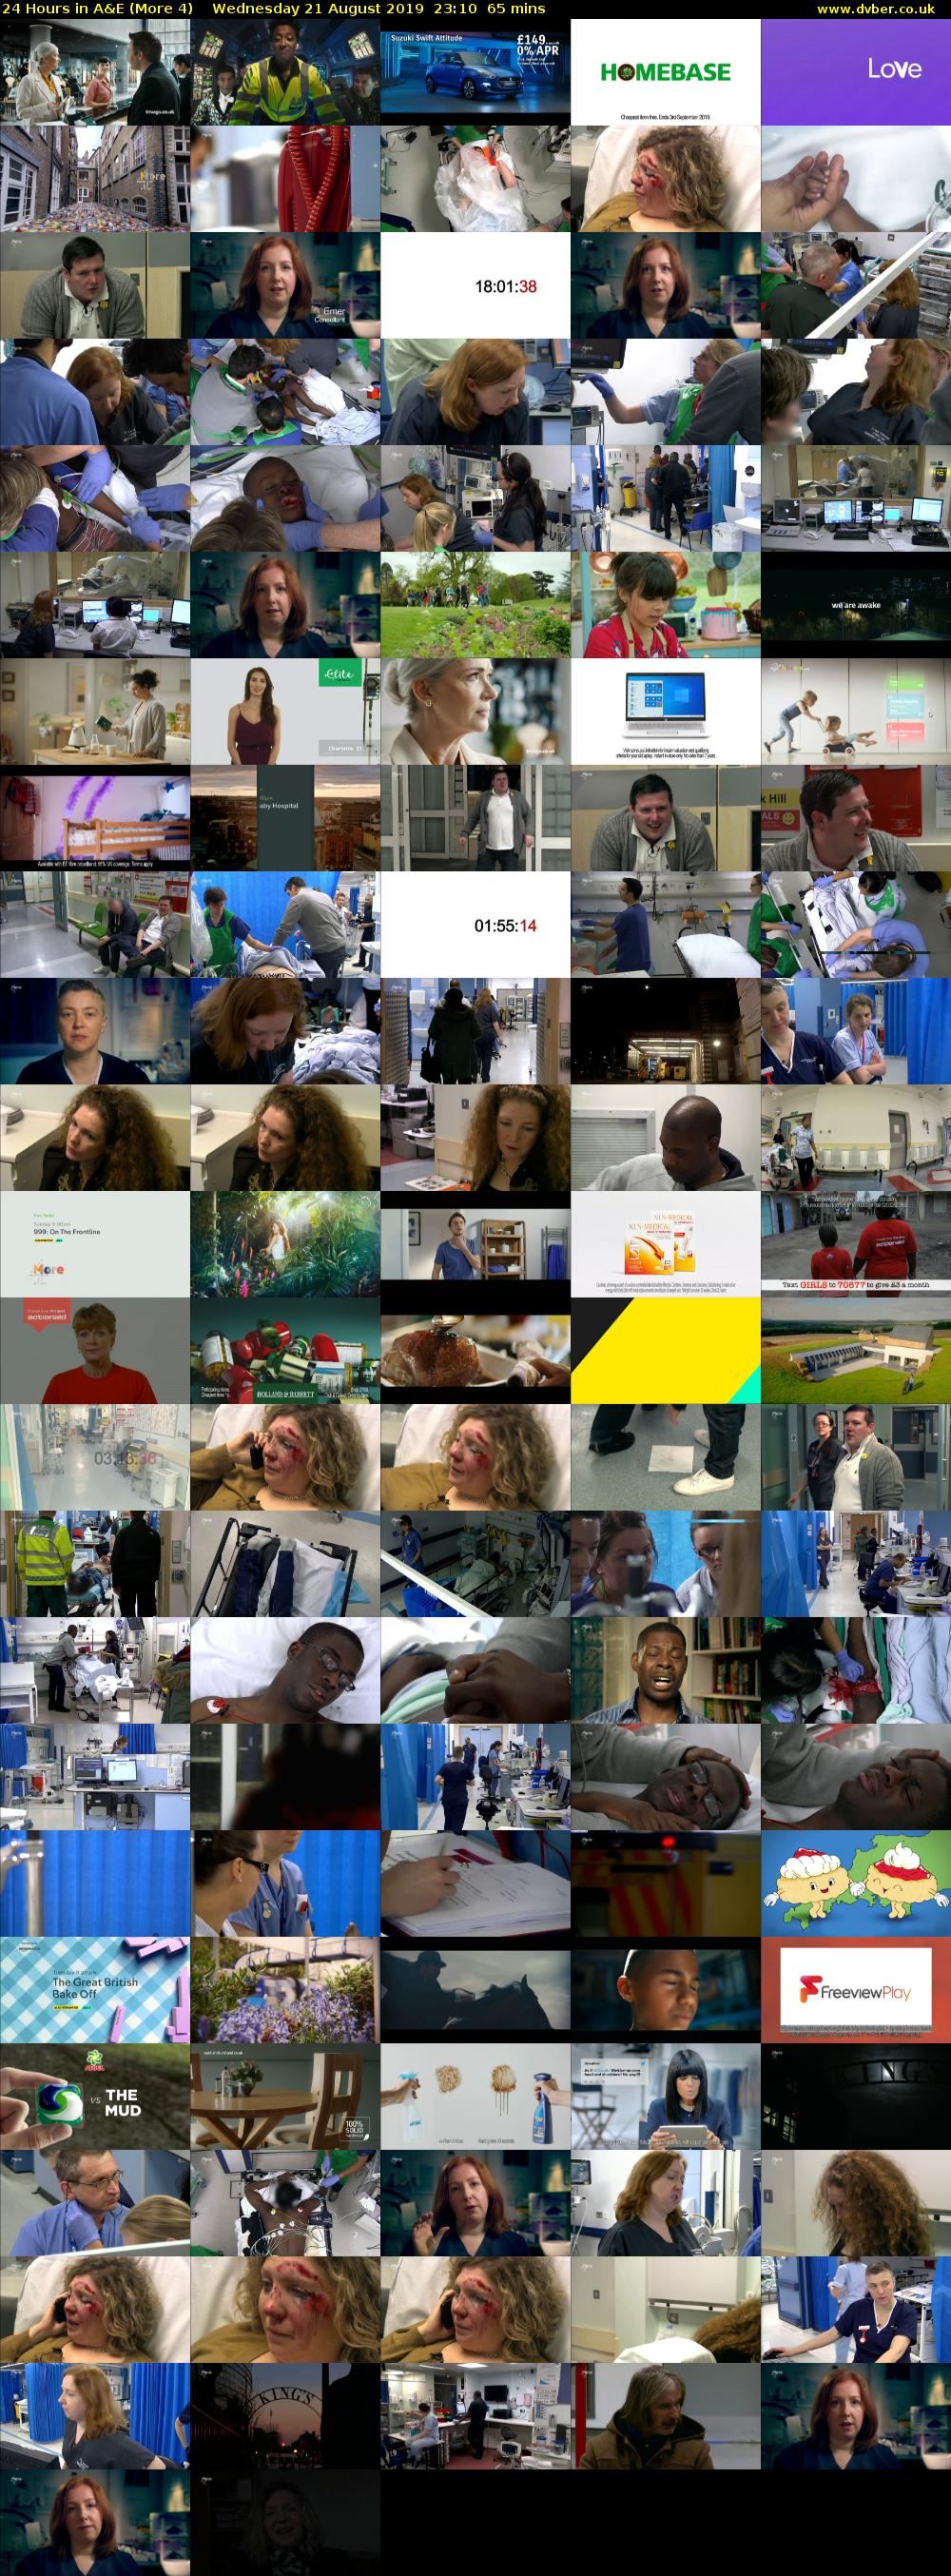 24 Hours in A&E (More 4) Wednesday 21 August 2019 23:10 - 00:15